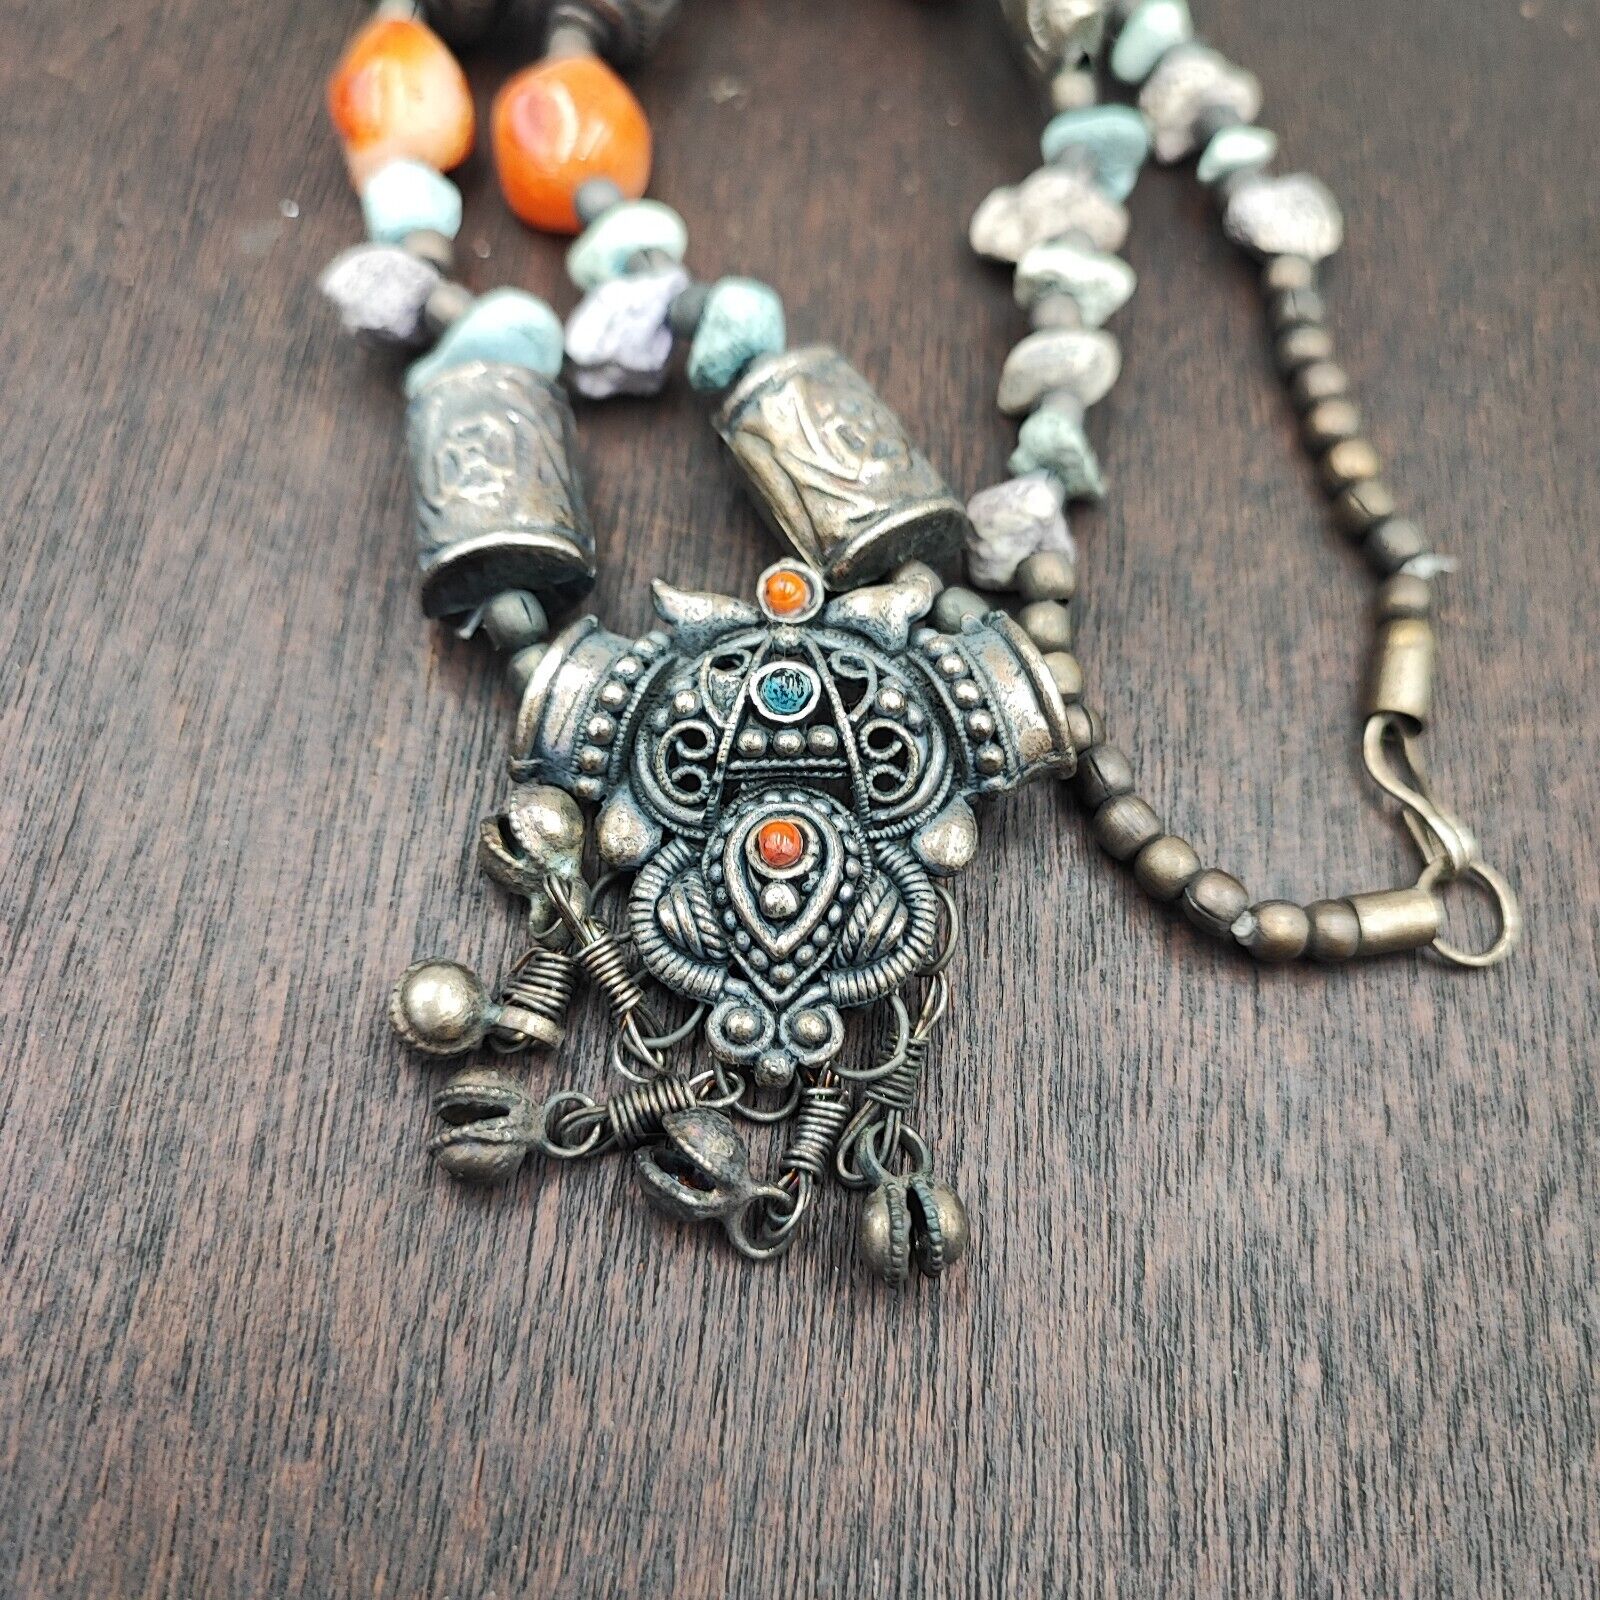 Beautiful Rusted Tibetan Silver Nepalese Stone Antique Jewelry Necklace